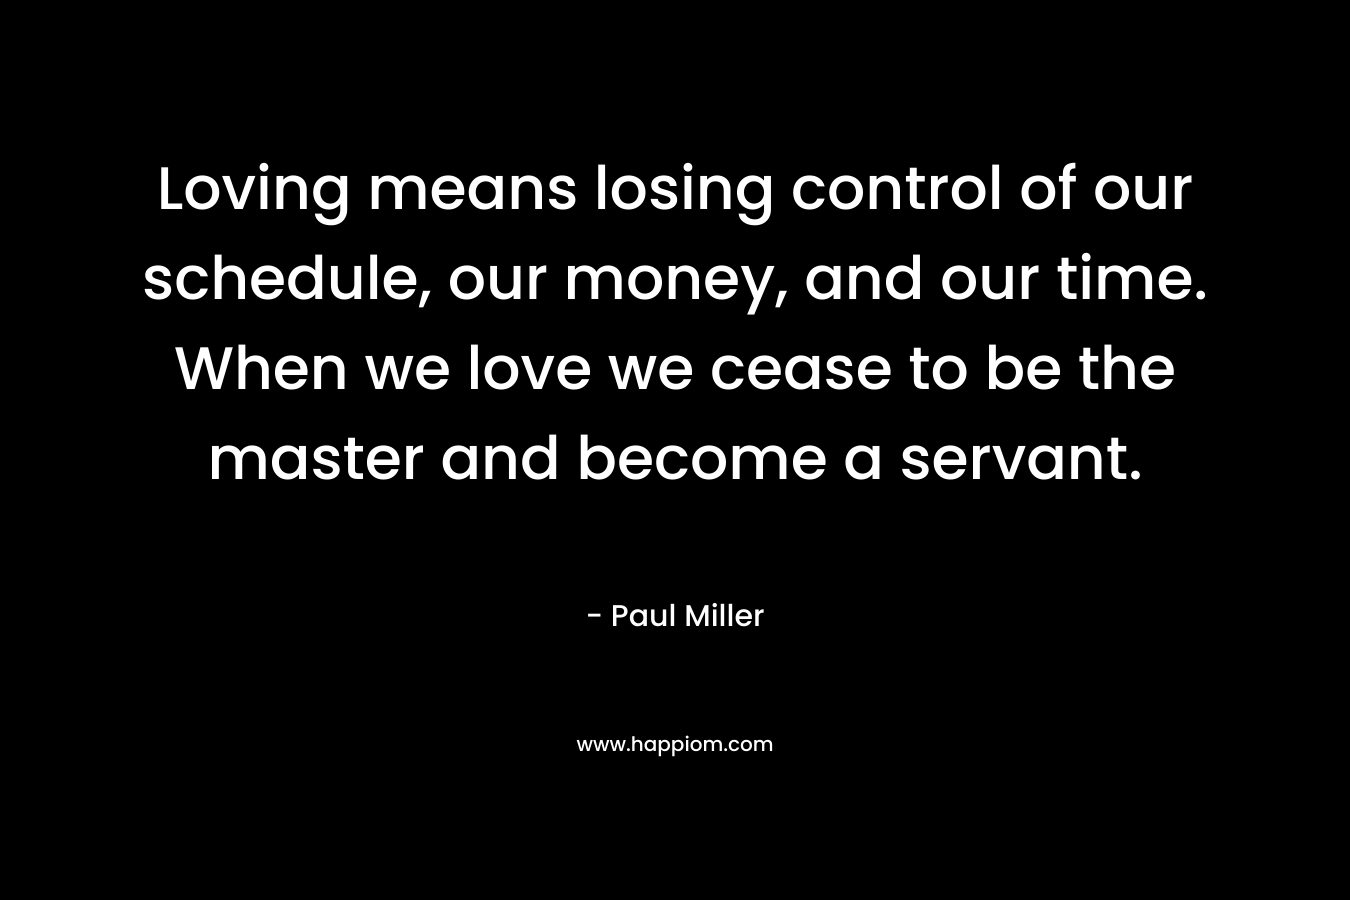 Loving means losing control of our schedule, our money, and our time. When we love we cease to be the master and become a servant. – Paul Miller